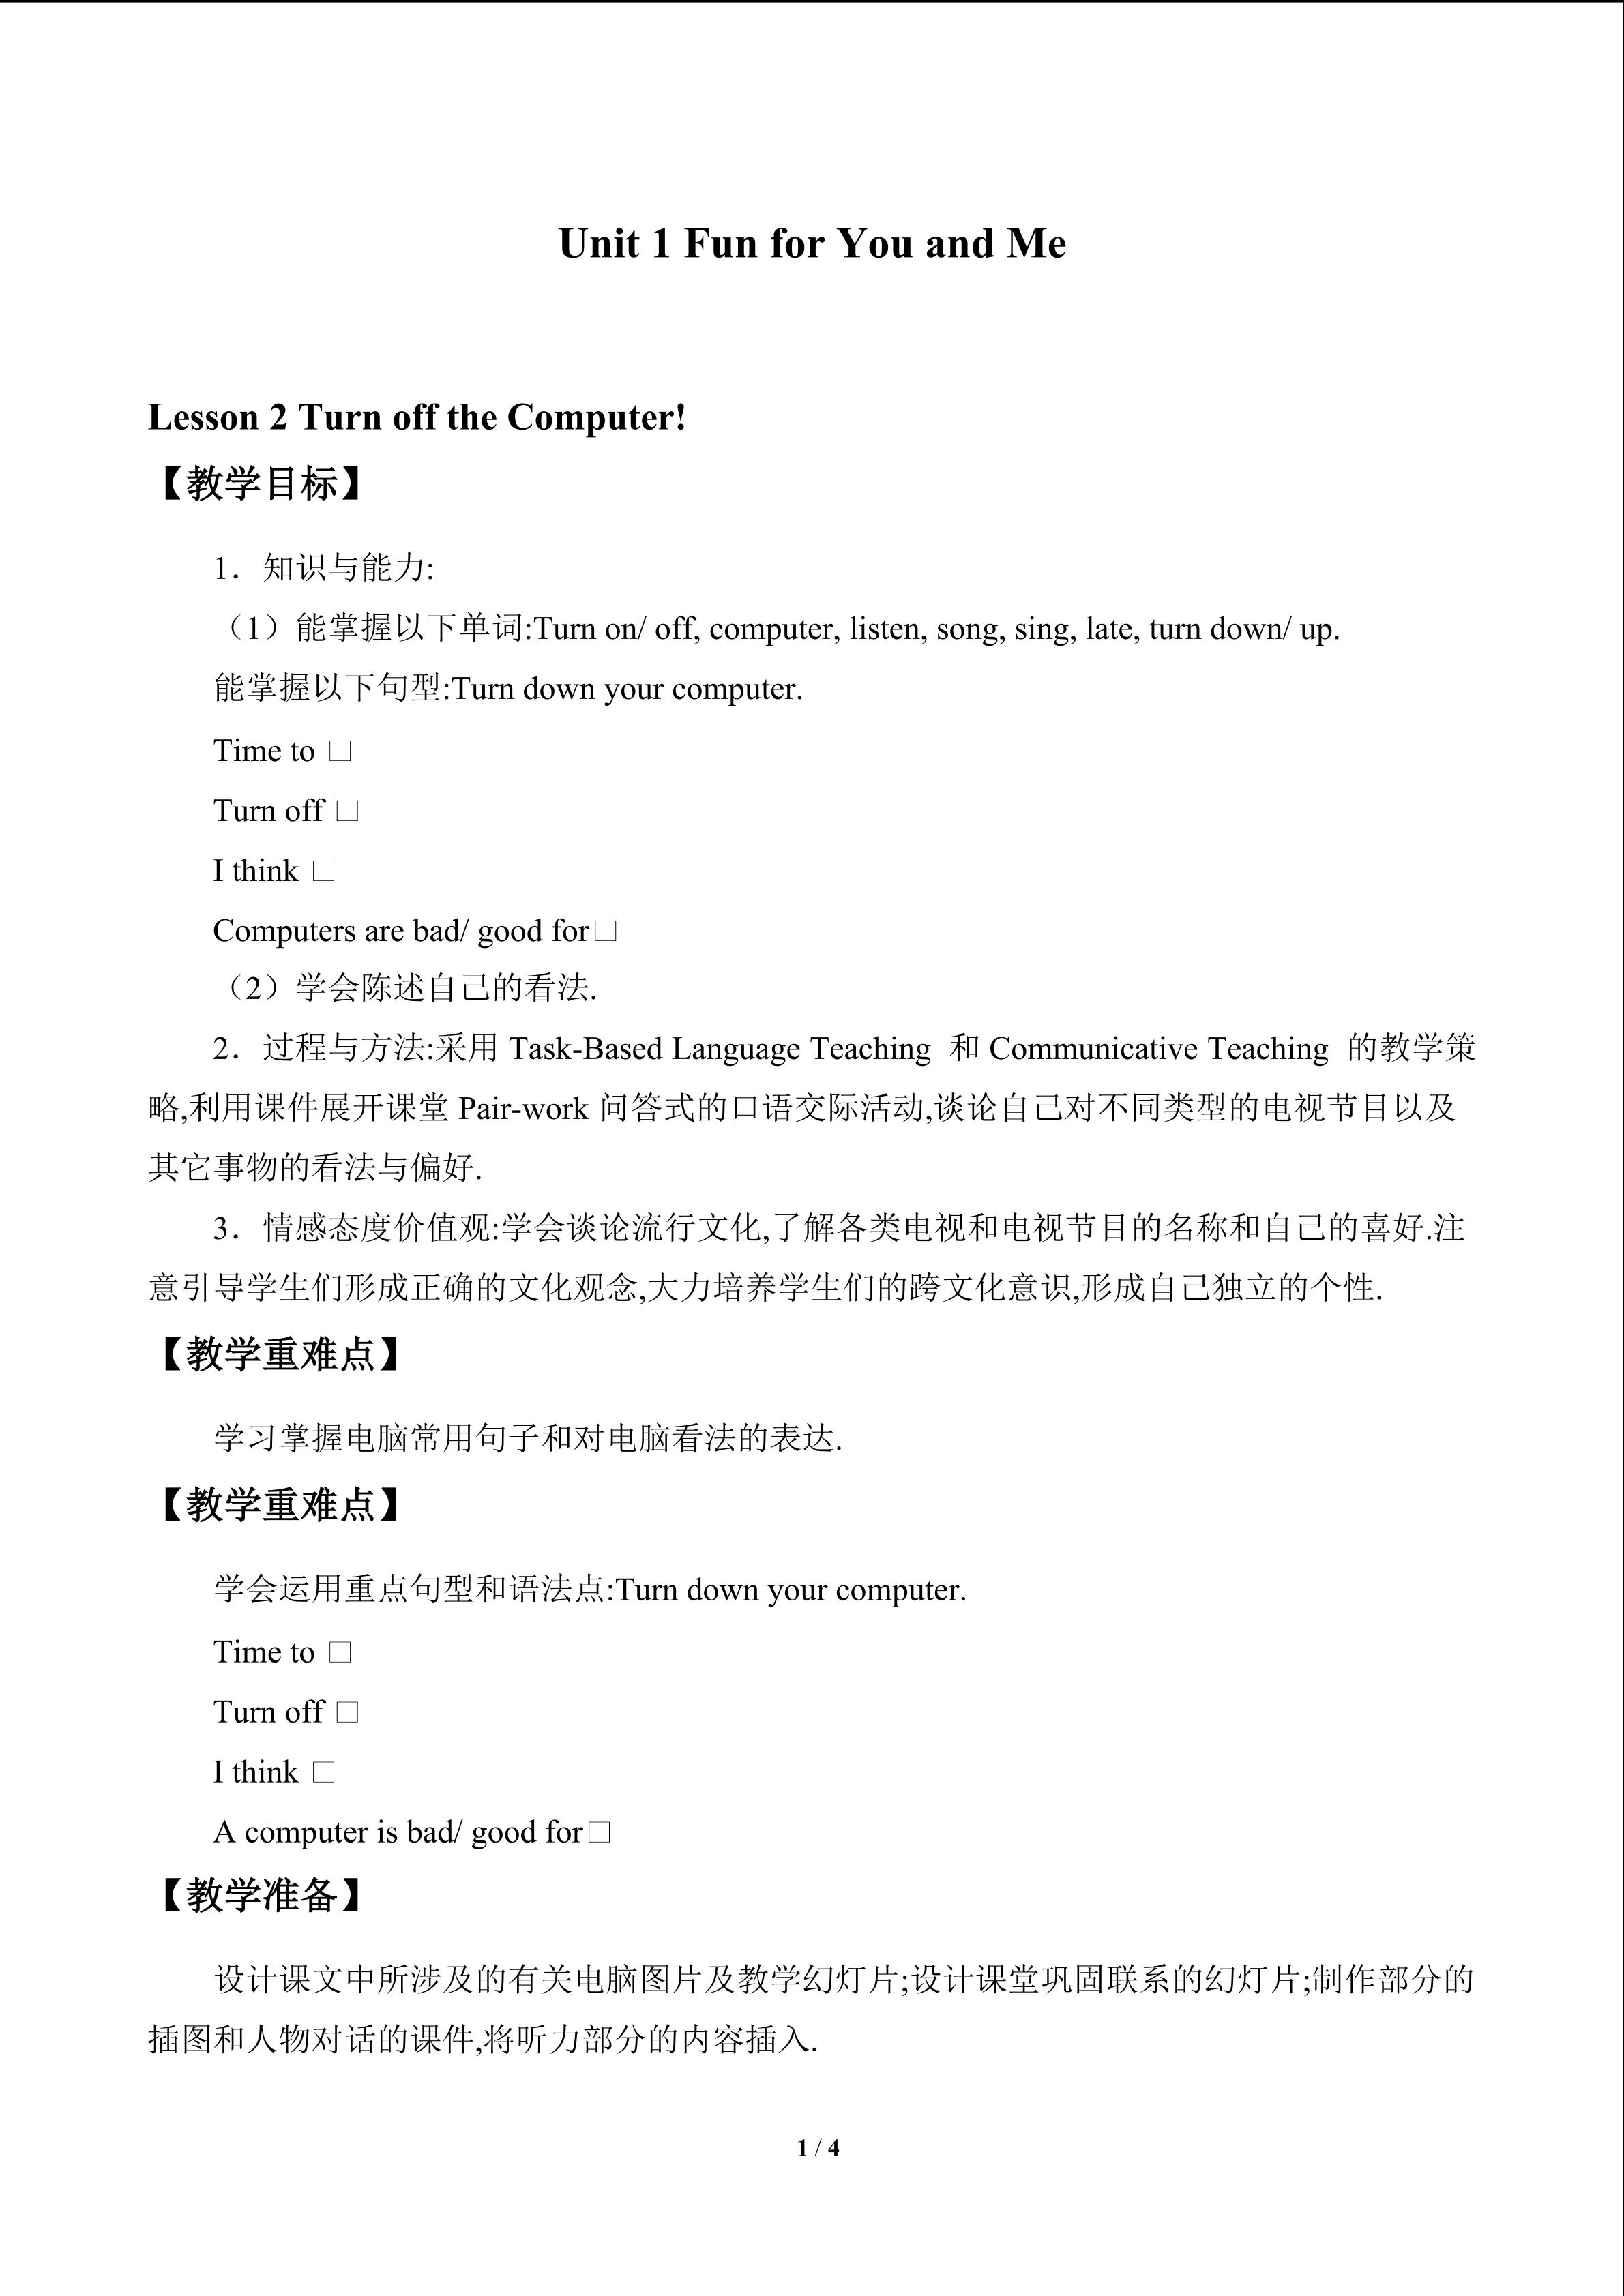 Unit 1 Fun for You and Me_教案2